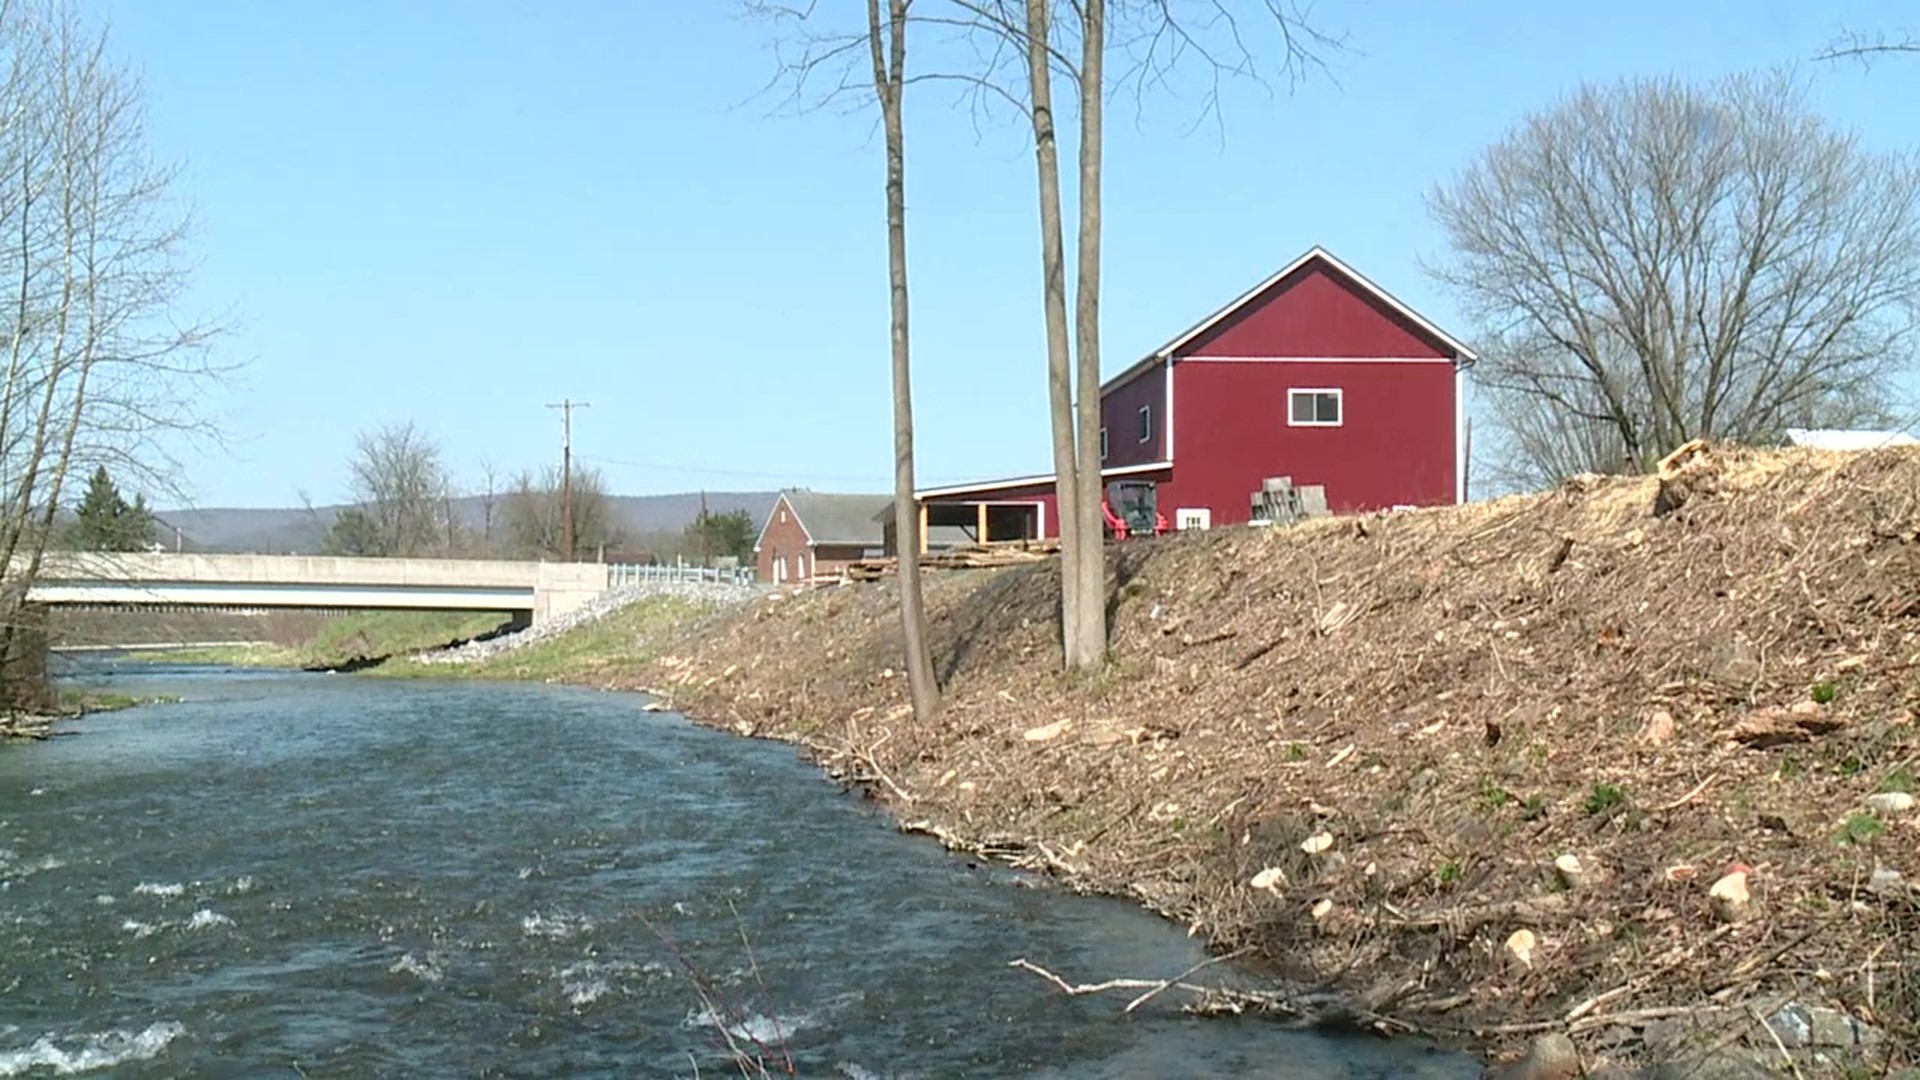 A new brewery coming to Mill Hall hopes to capture the eye of many people in our area who like to fish.